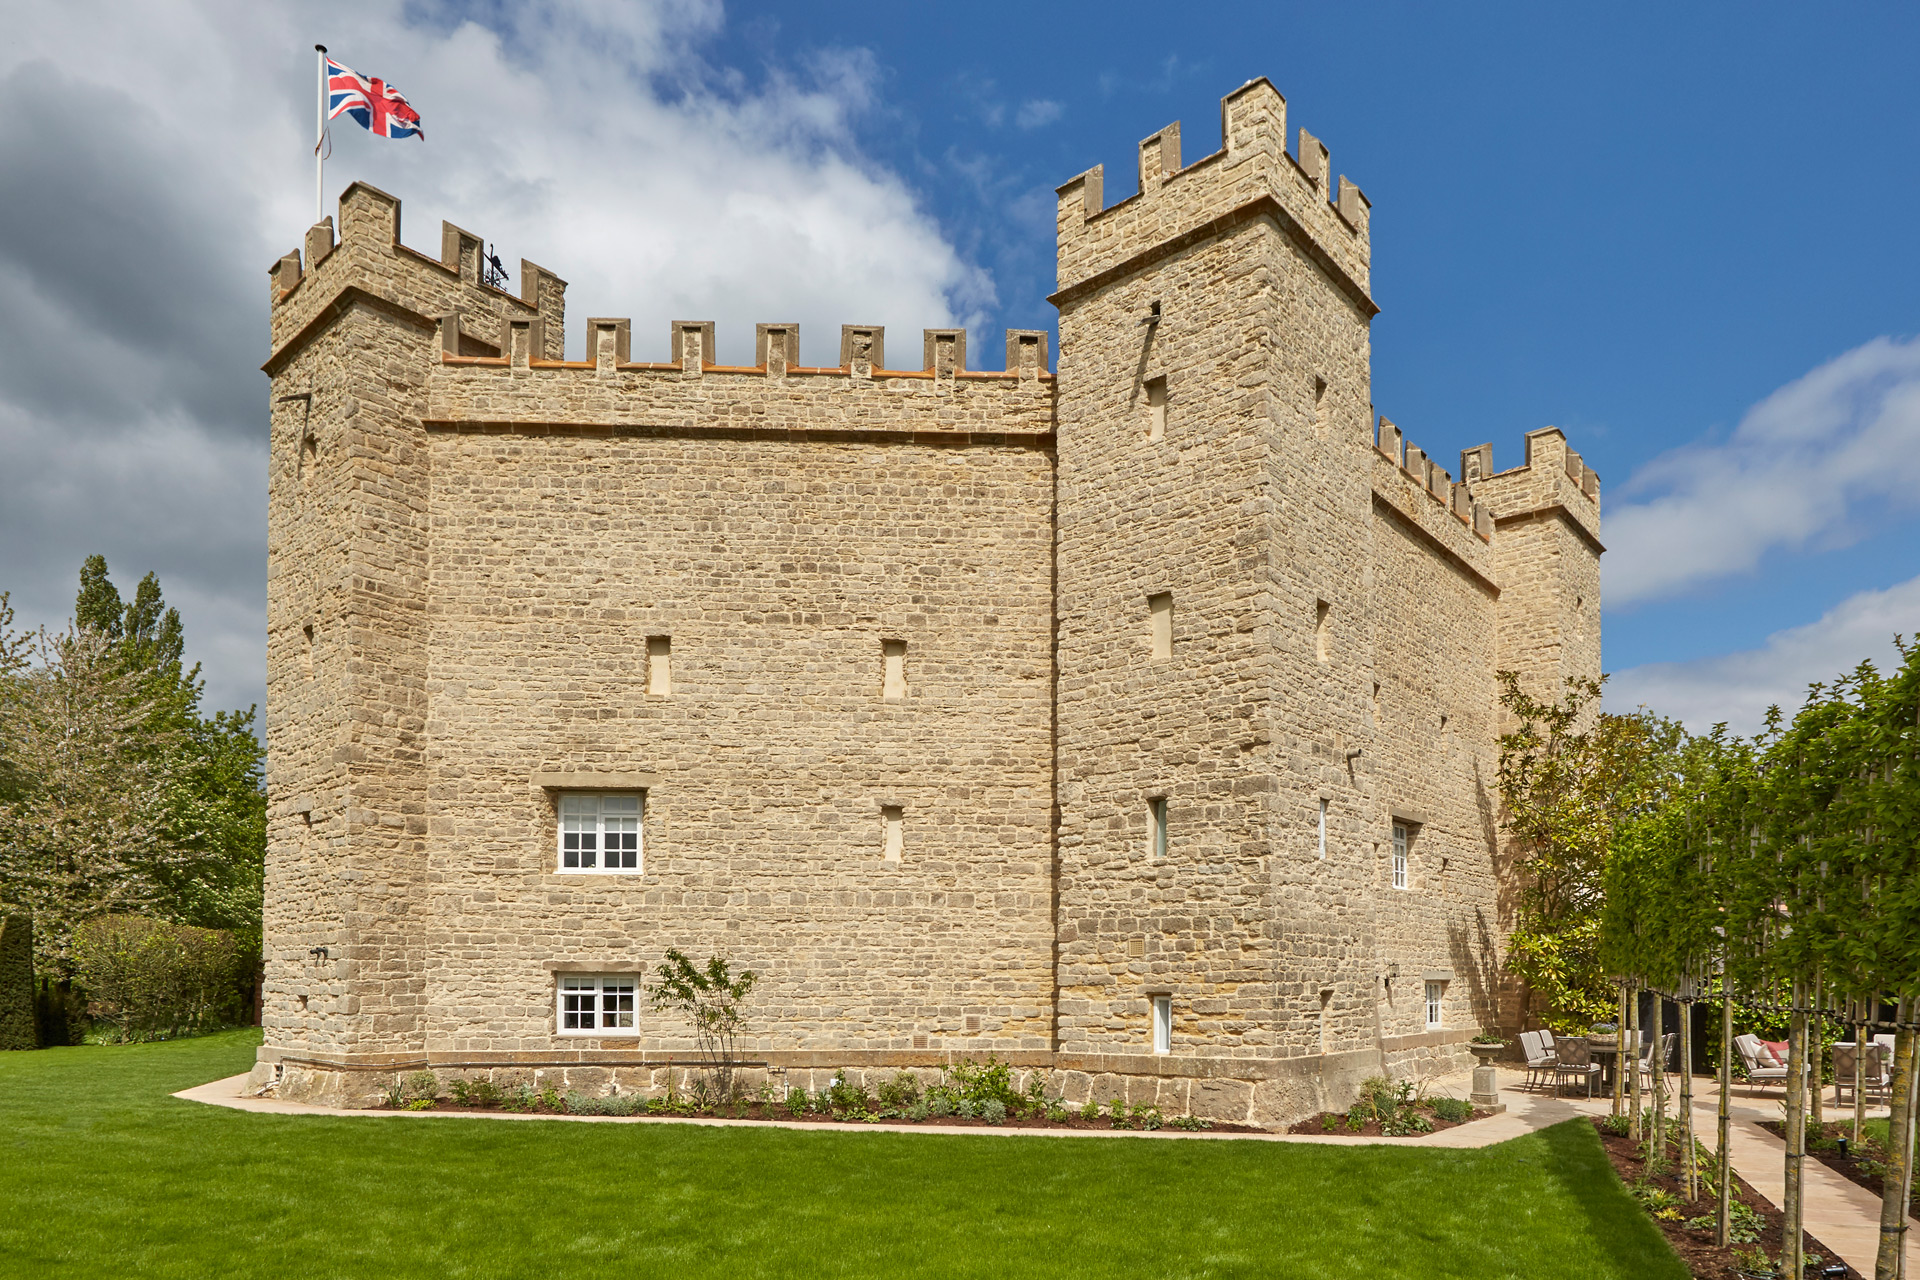 Exterior of castellated house in Stowe with sandstone brick, turrets, and a union jack flag flying from the top